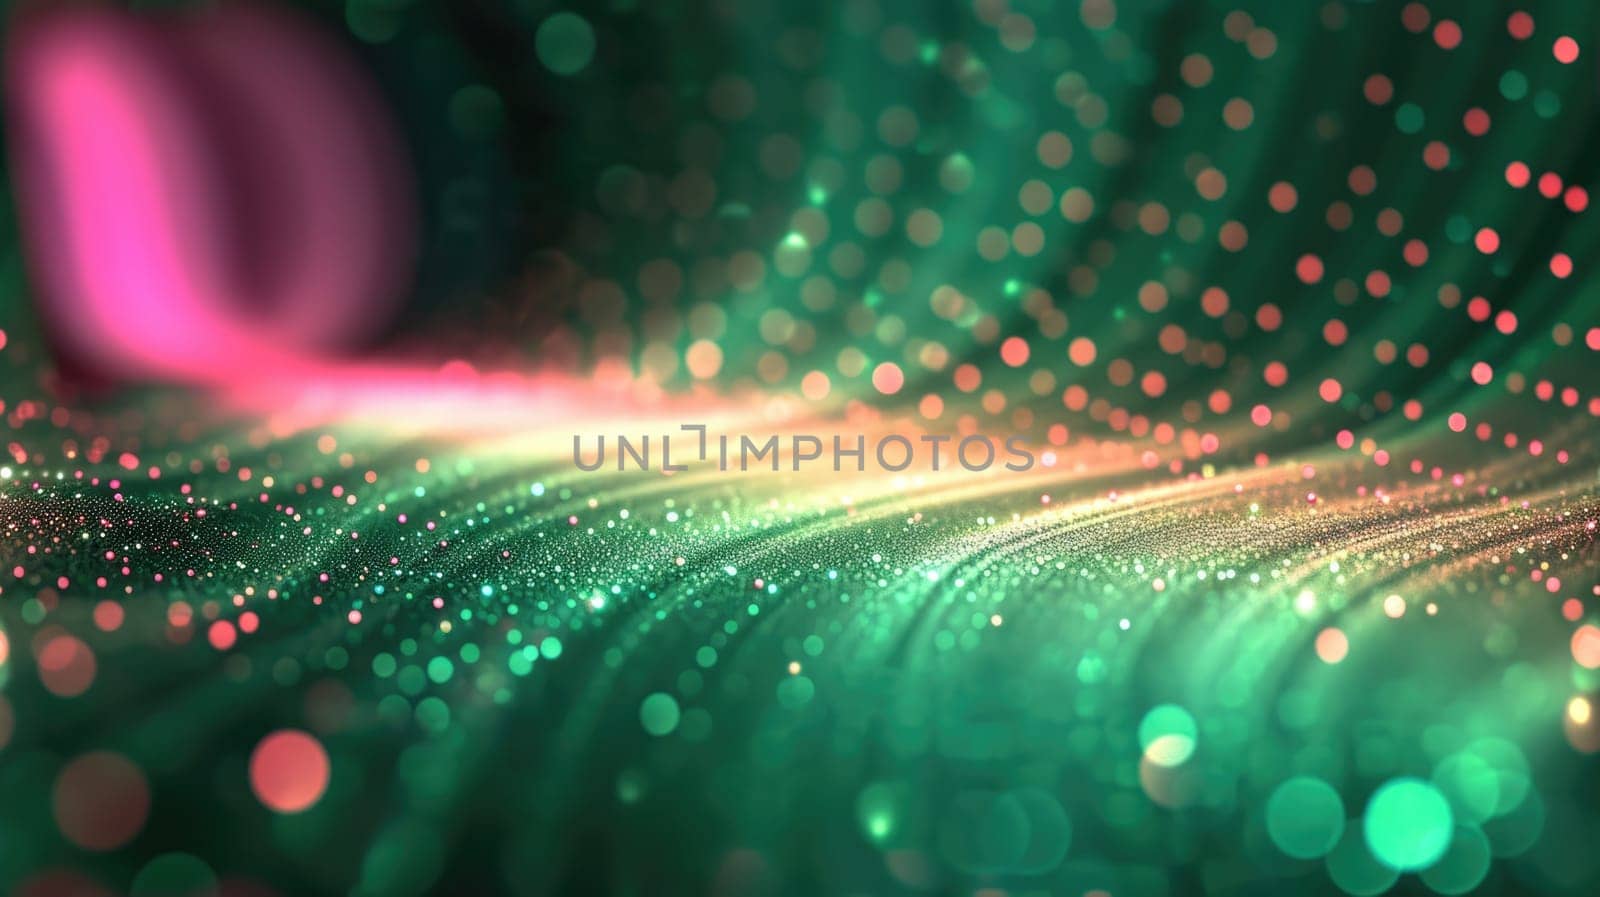 The green pink hologram abstract picture in form of the brightly glittering wave that seems like liquid yet looks solid at the same time and also bright with the source of the light of itself. AIGX01.